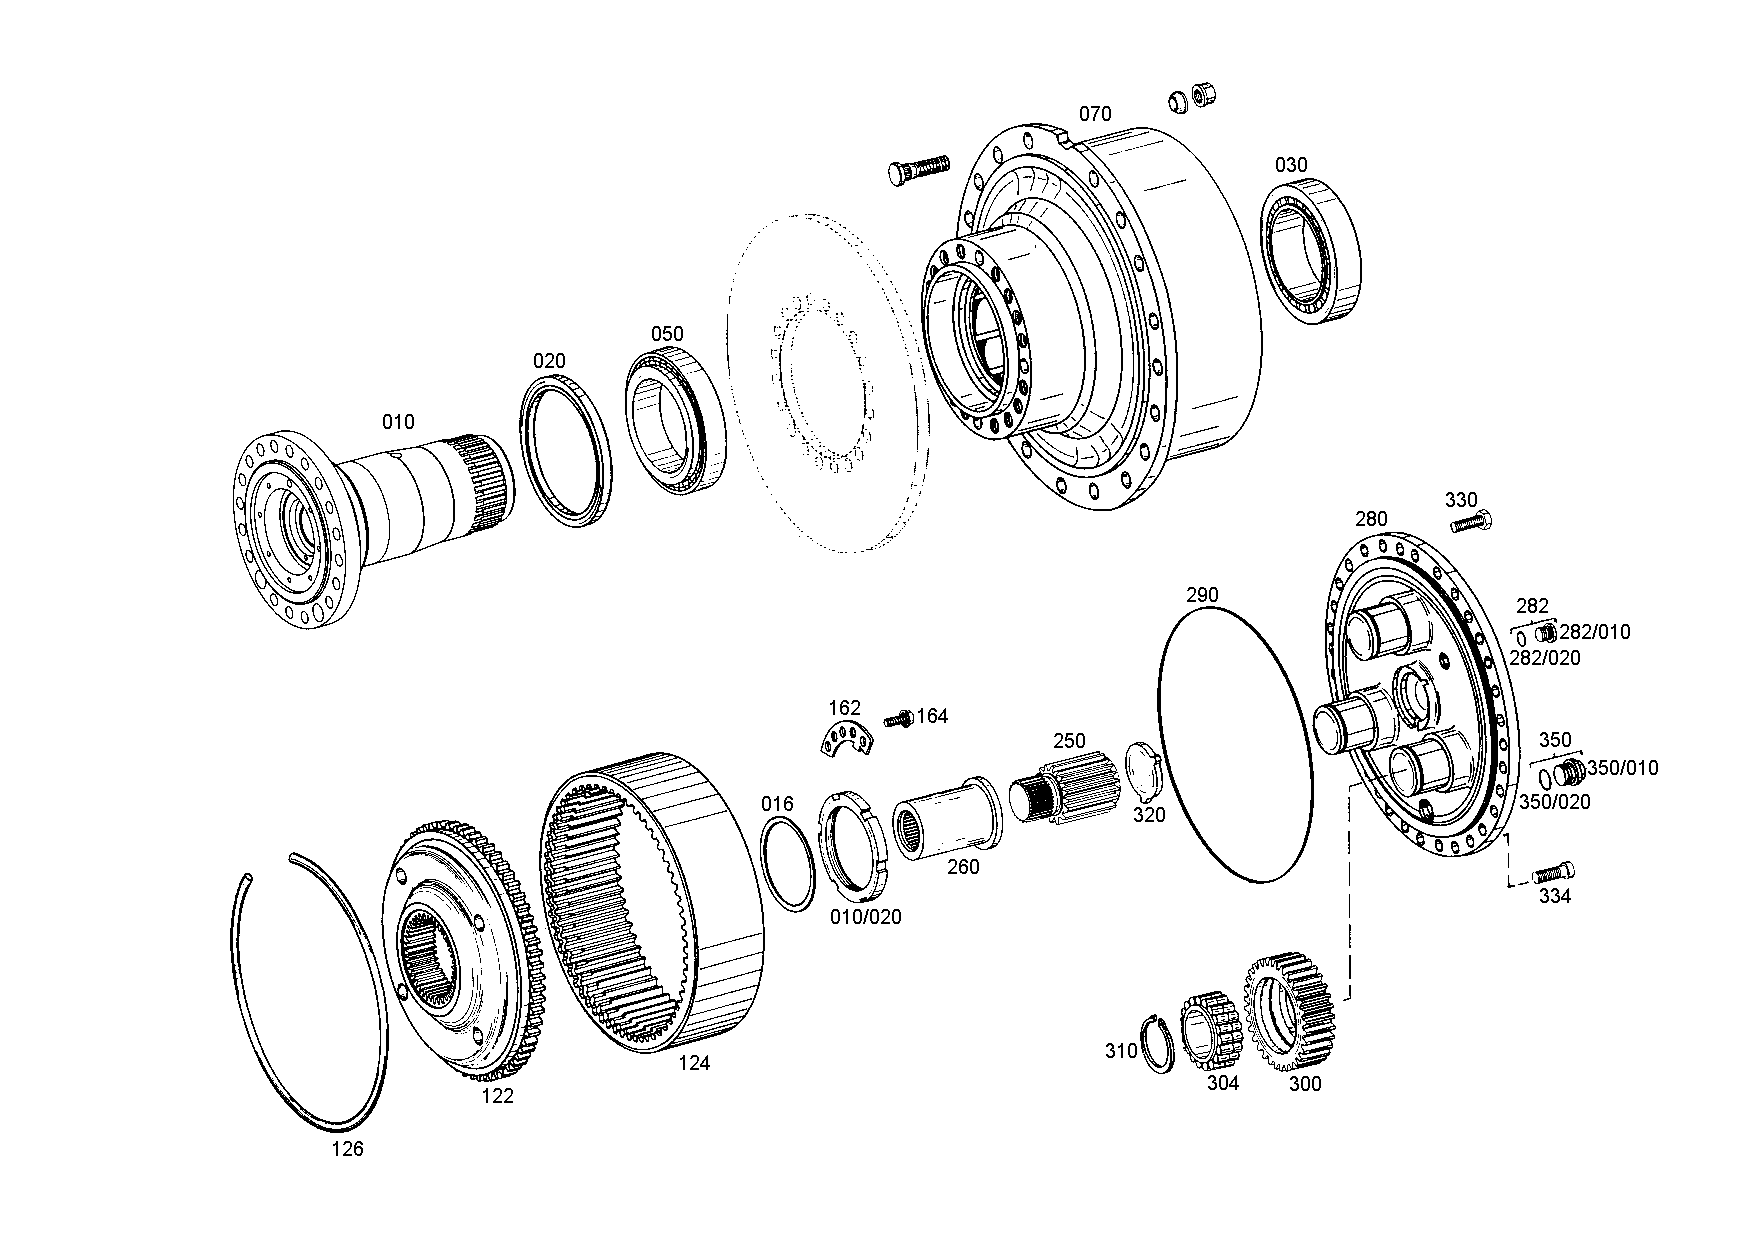 drawing for Astra Veicoli Industriali 0000000134642 - SHAFT SEAL